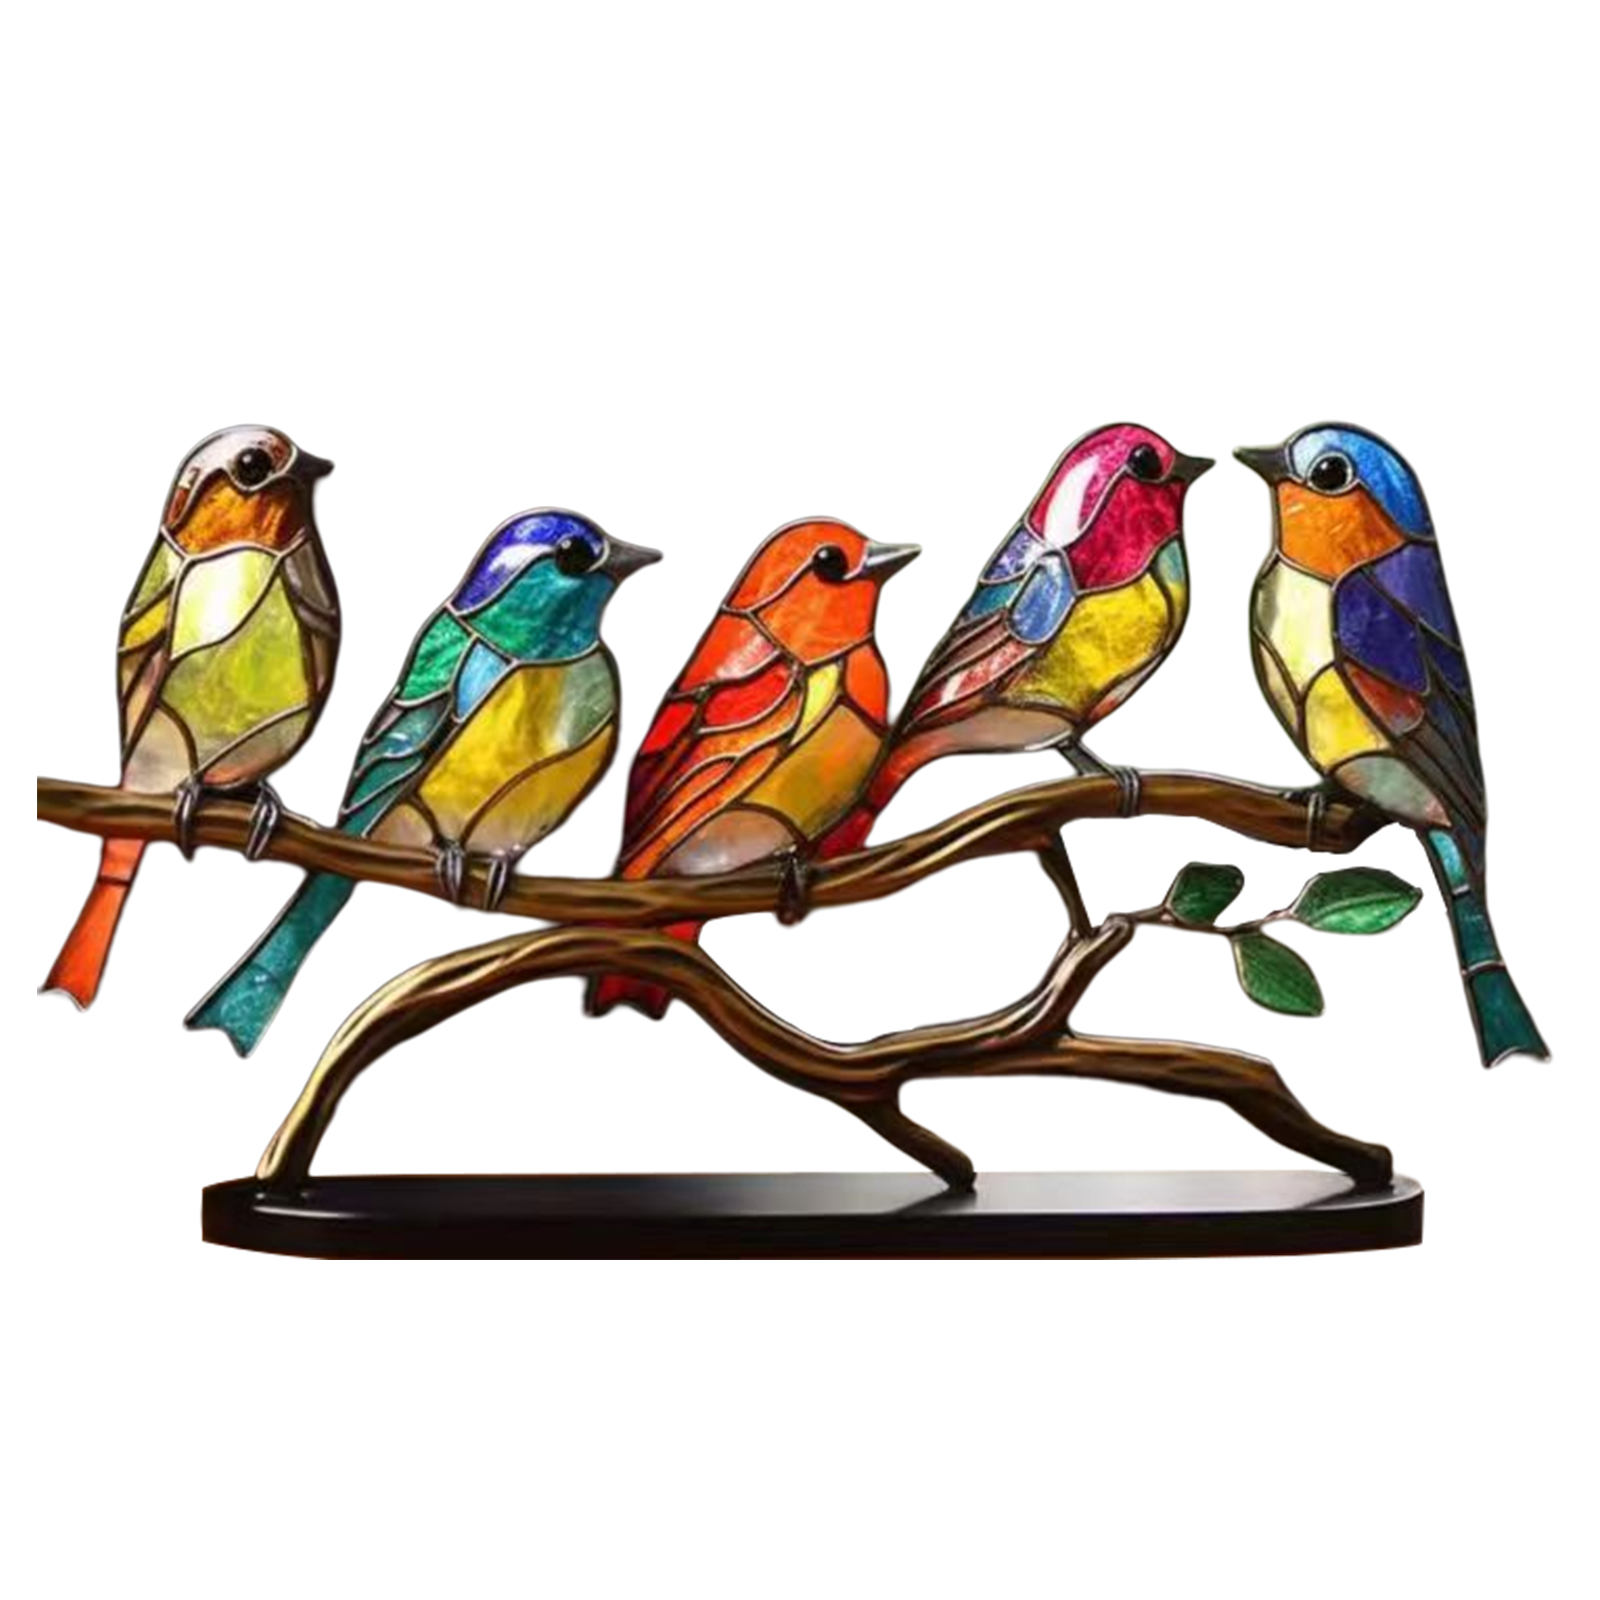 Acrylic Birds on Branch Statue Art Craft Stained Birds Ornament Home Decor (E)